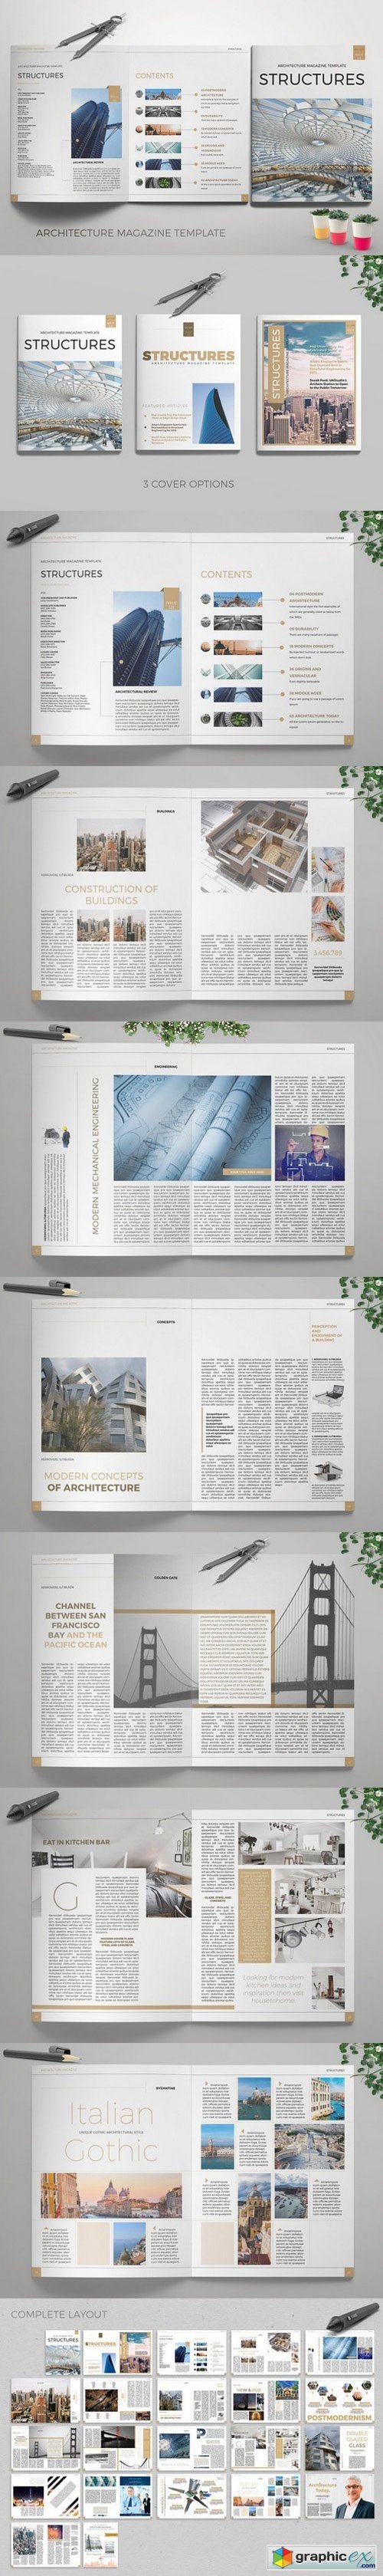 Structures Magazine InDesign template